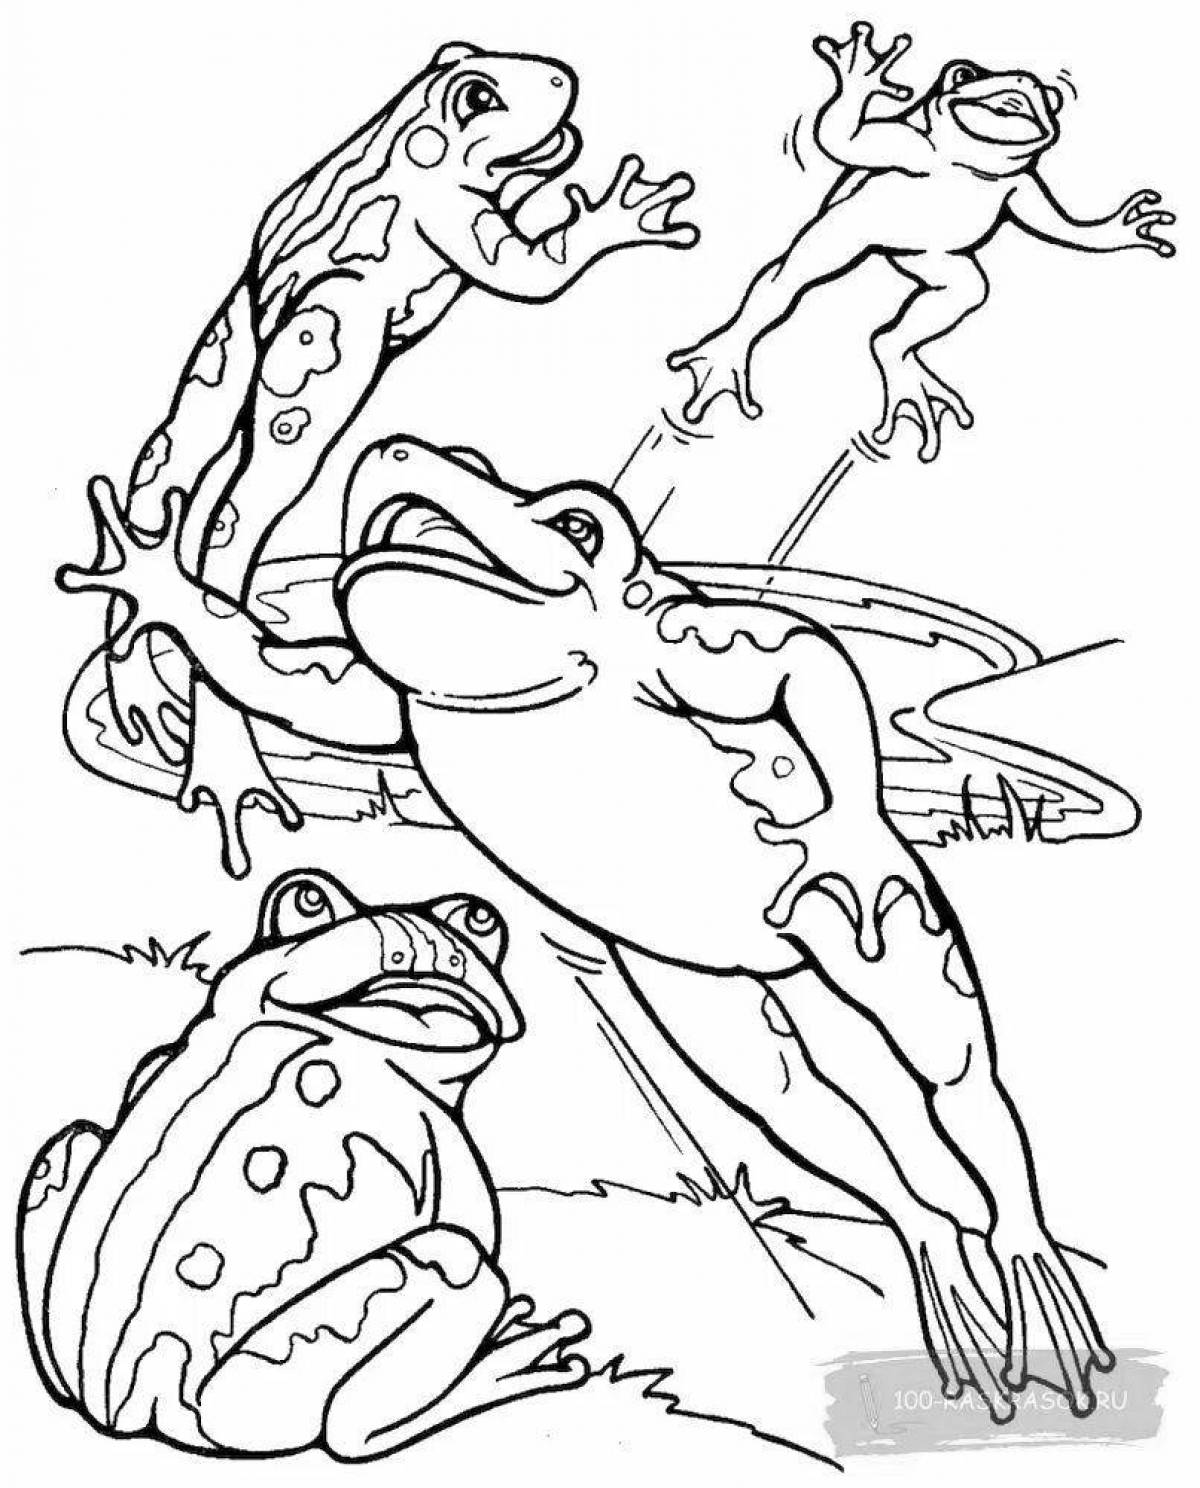 Cute travel frog coloring page for kids